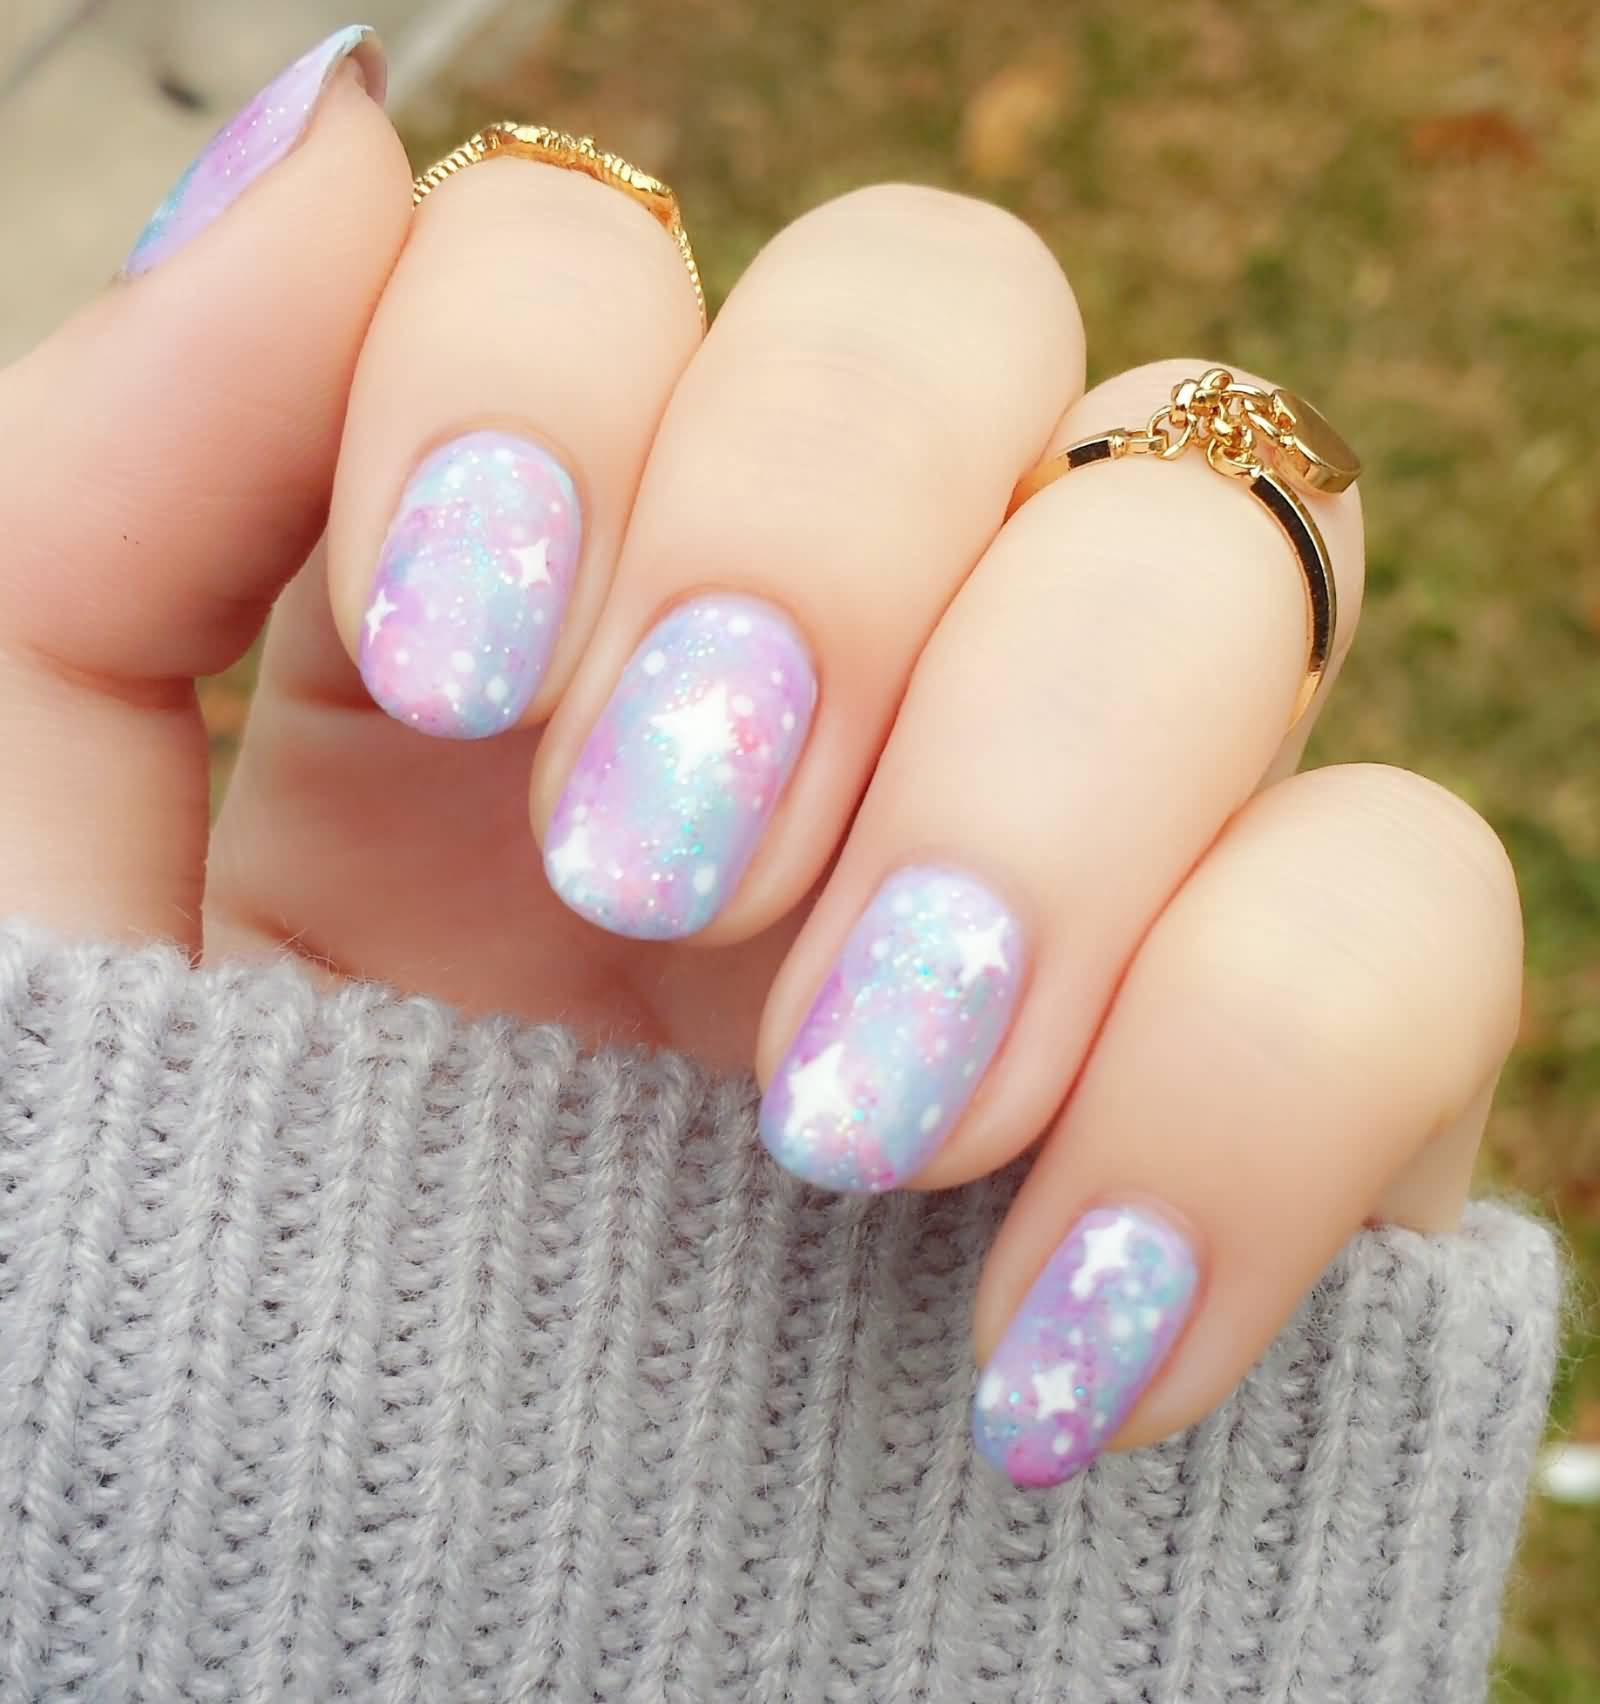 Pastel Nail Designs
 50 Most Beautiful Pastel Nail Art Design Ideas For Trendy